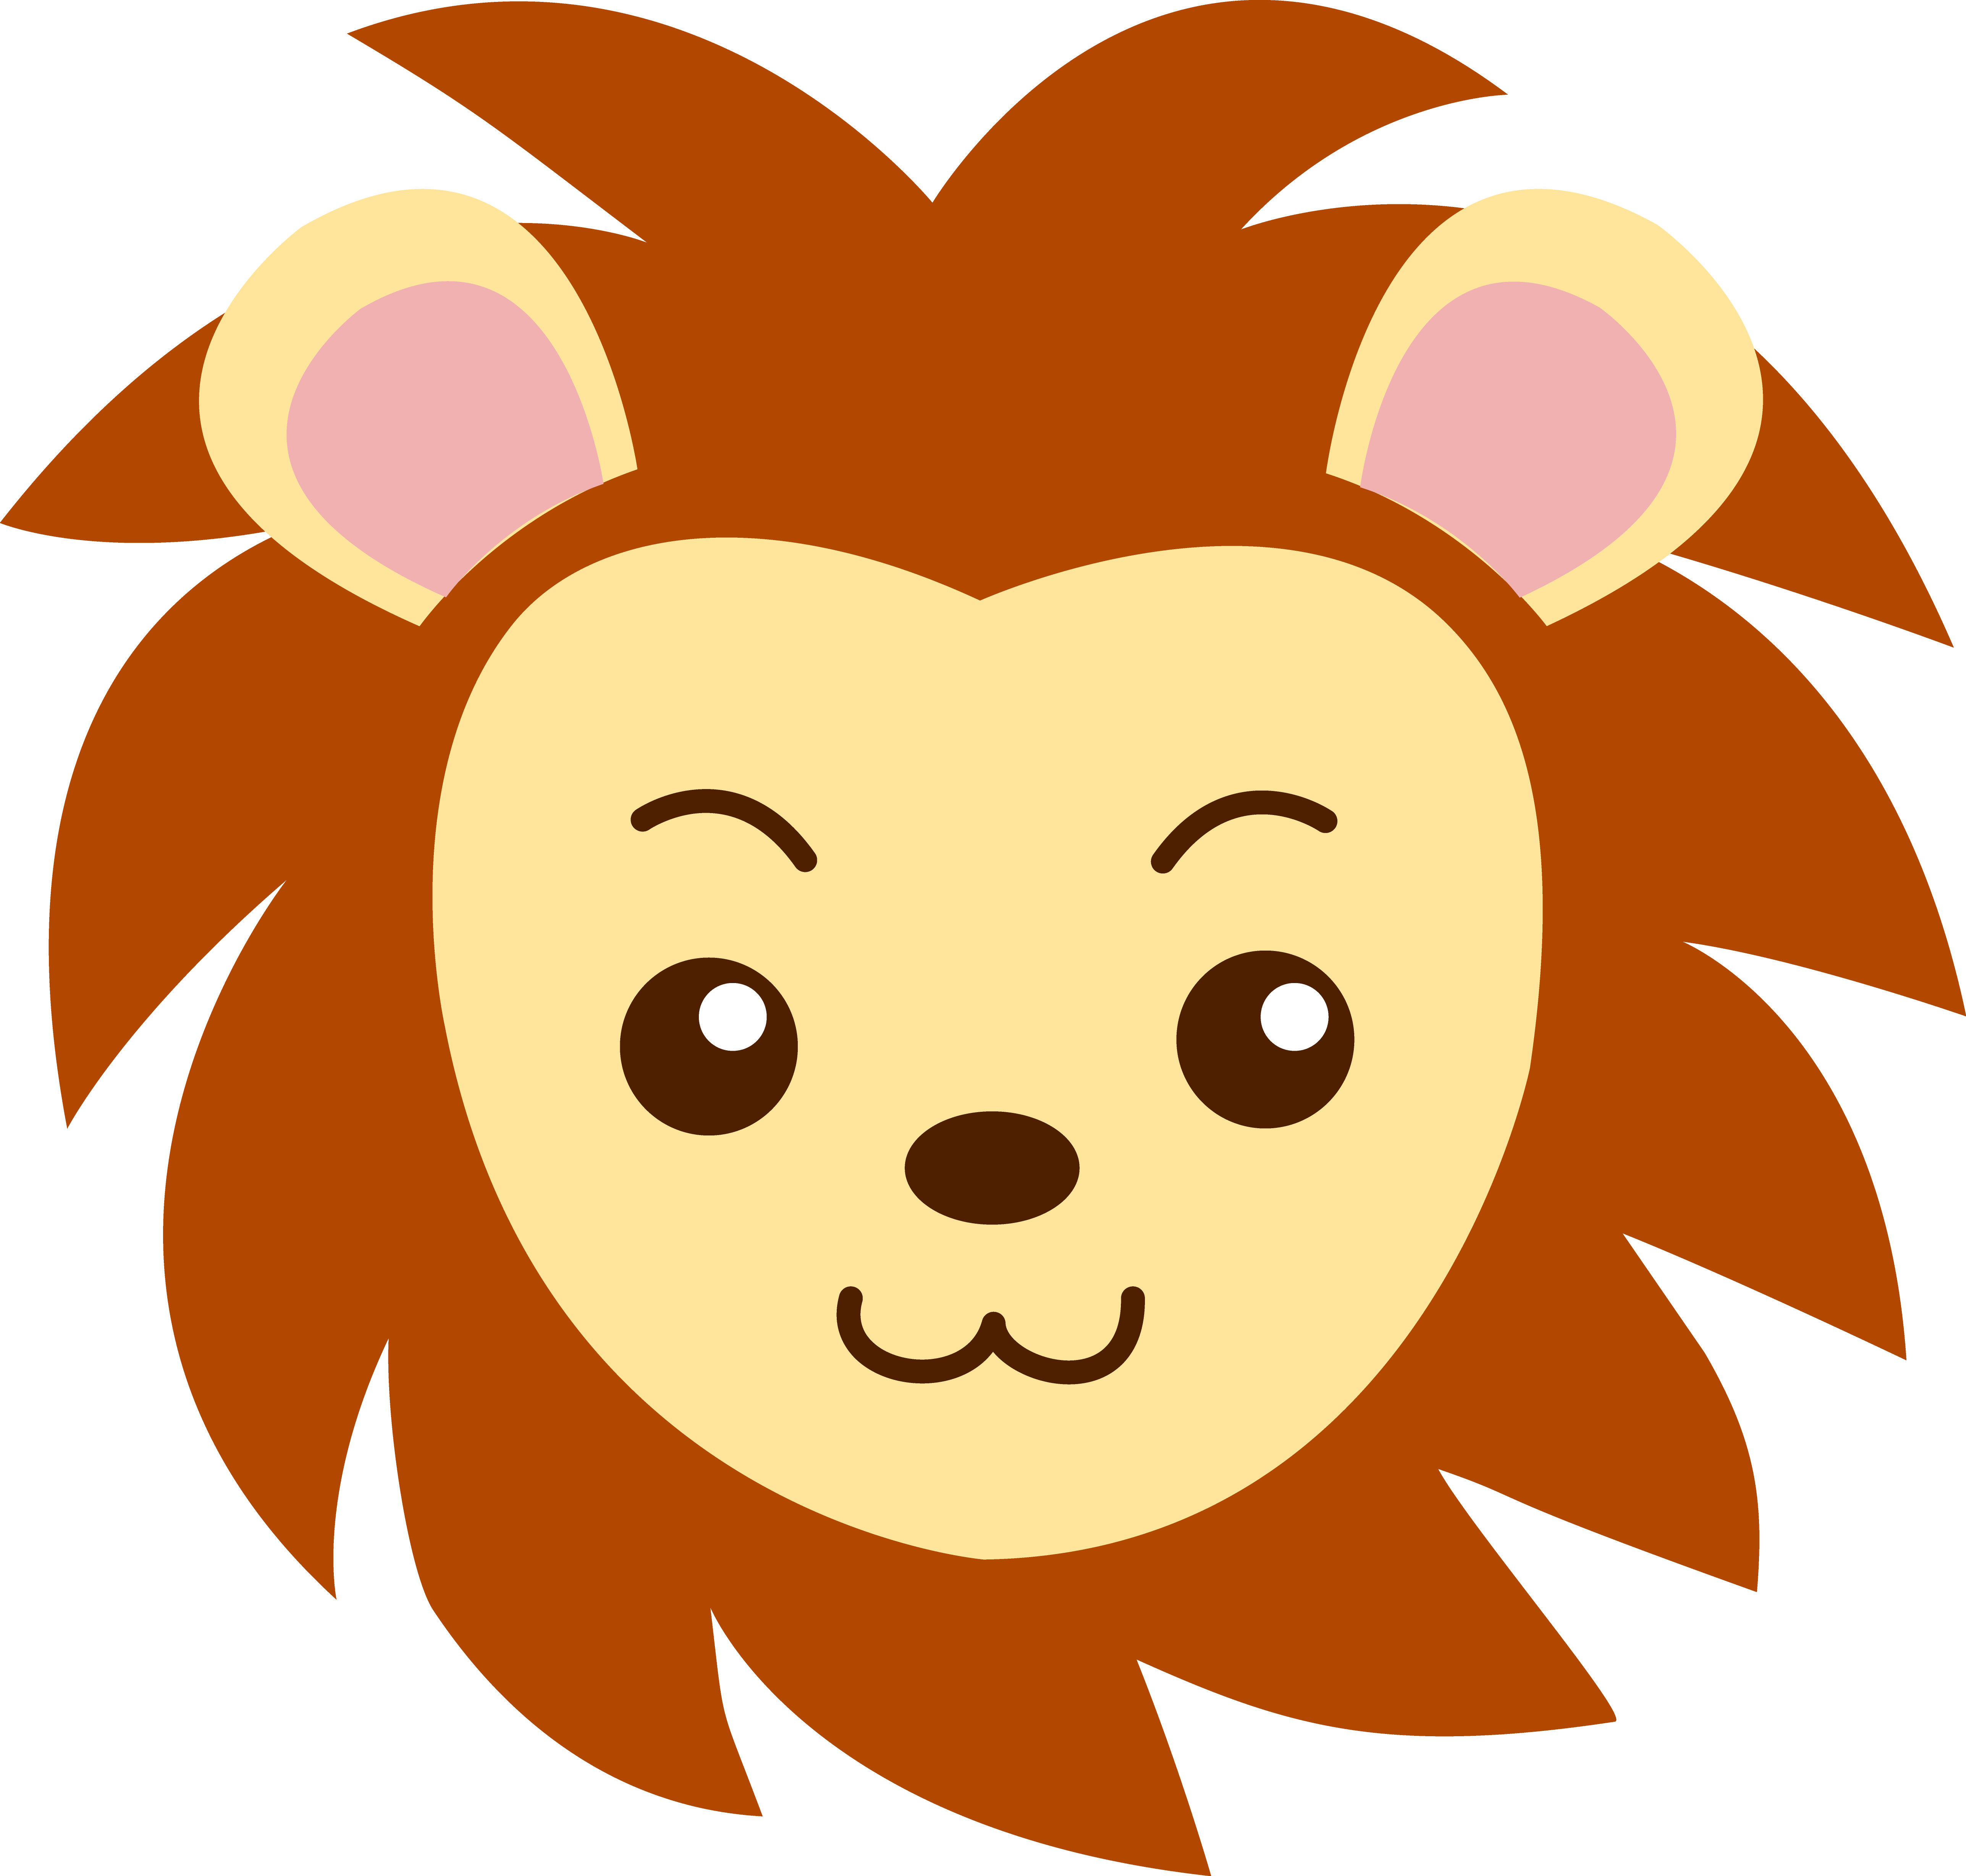 Lion for kids at. Club clipart cute